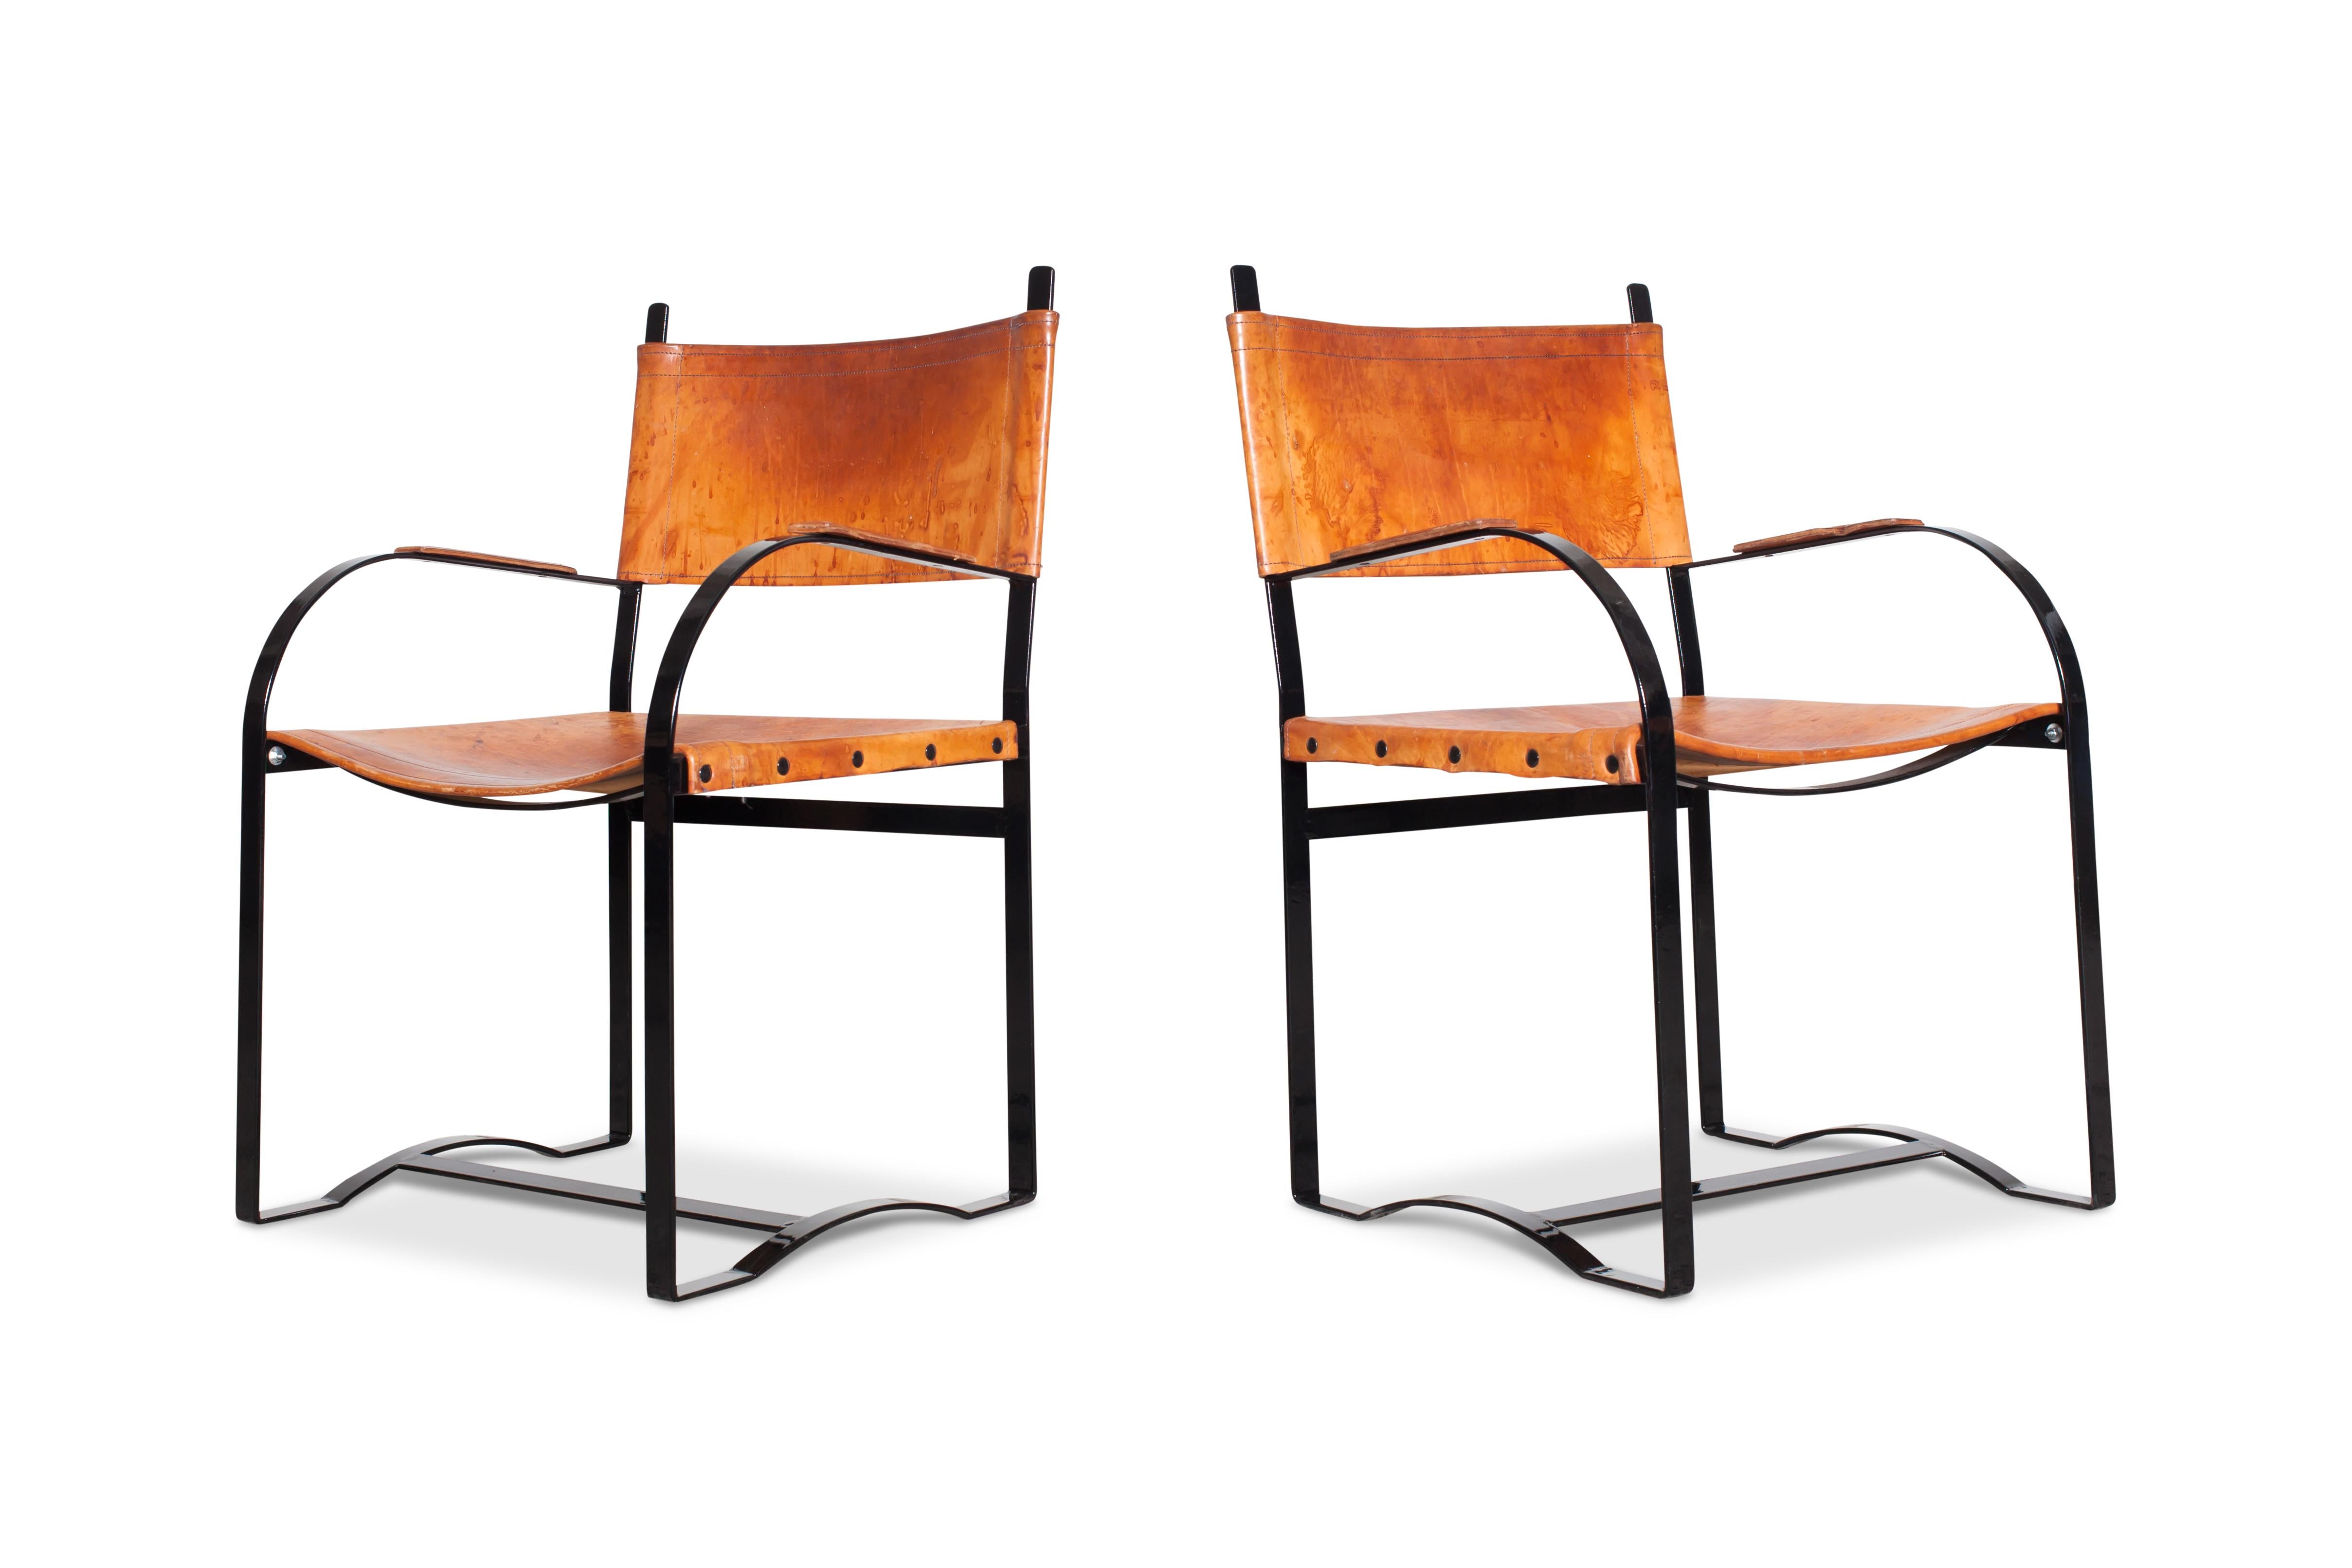 Midcentury Scandinavian Modern patinated cognac leather dining chairs. 
In the style of the Flat Steel Series by Danish designer Hans Wegner. Black lacquered steel frame and cognac leather support. The patina on these chairs is truly amazing.

We